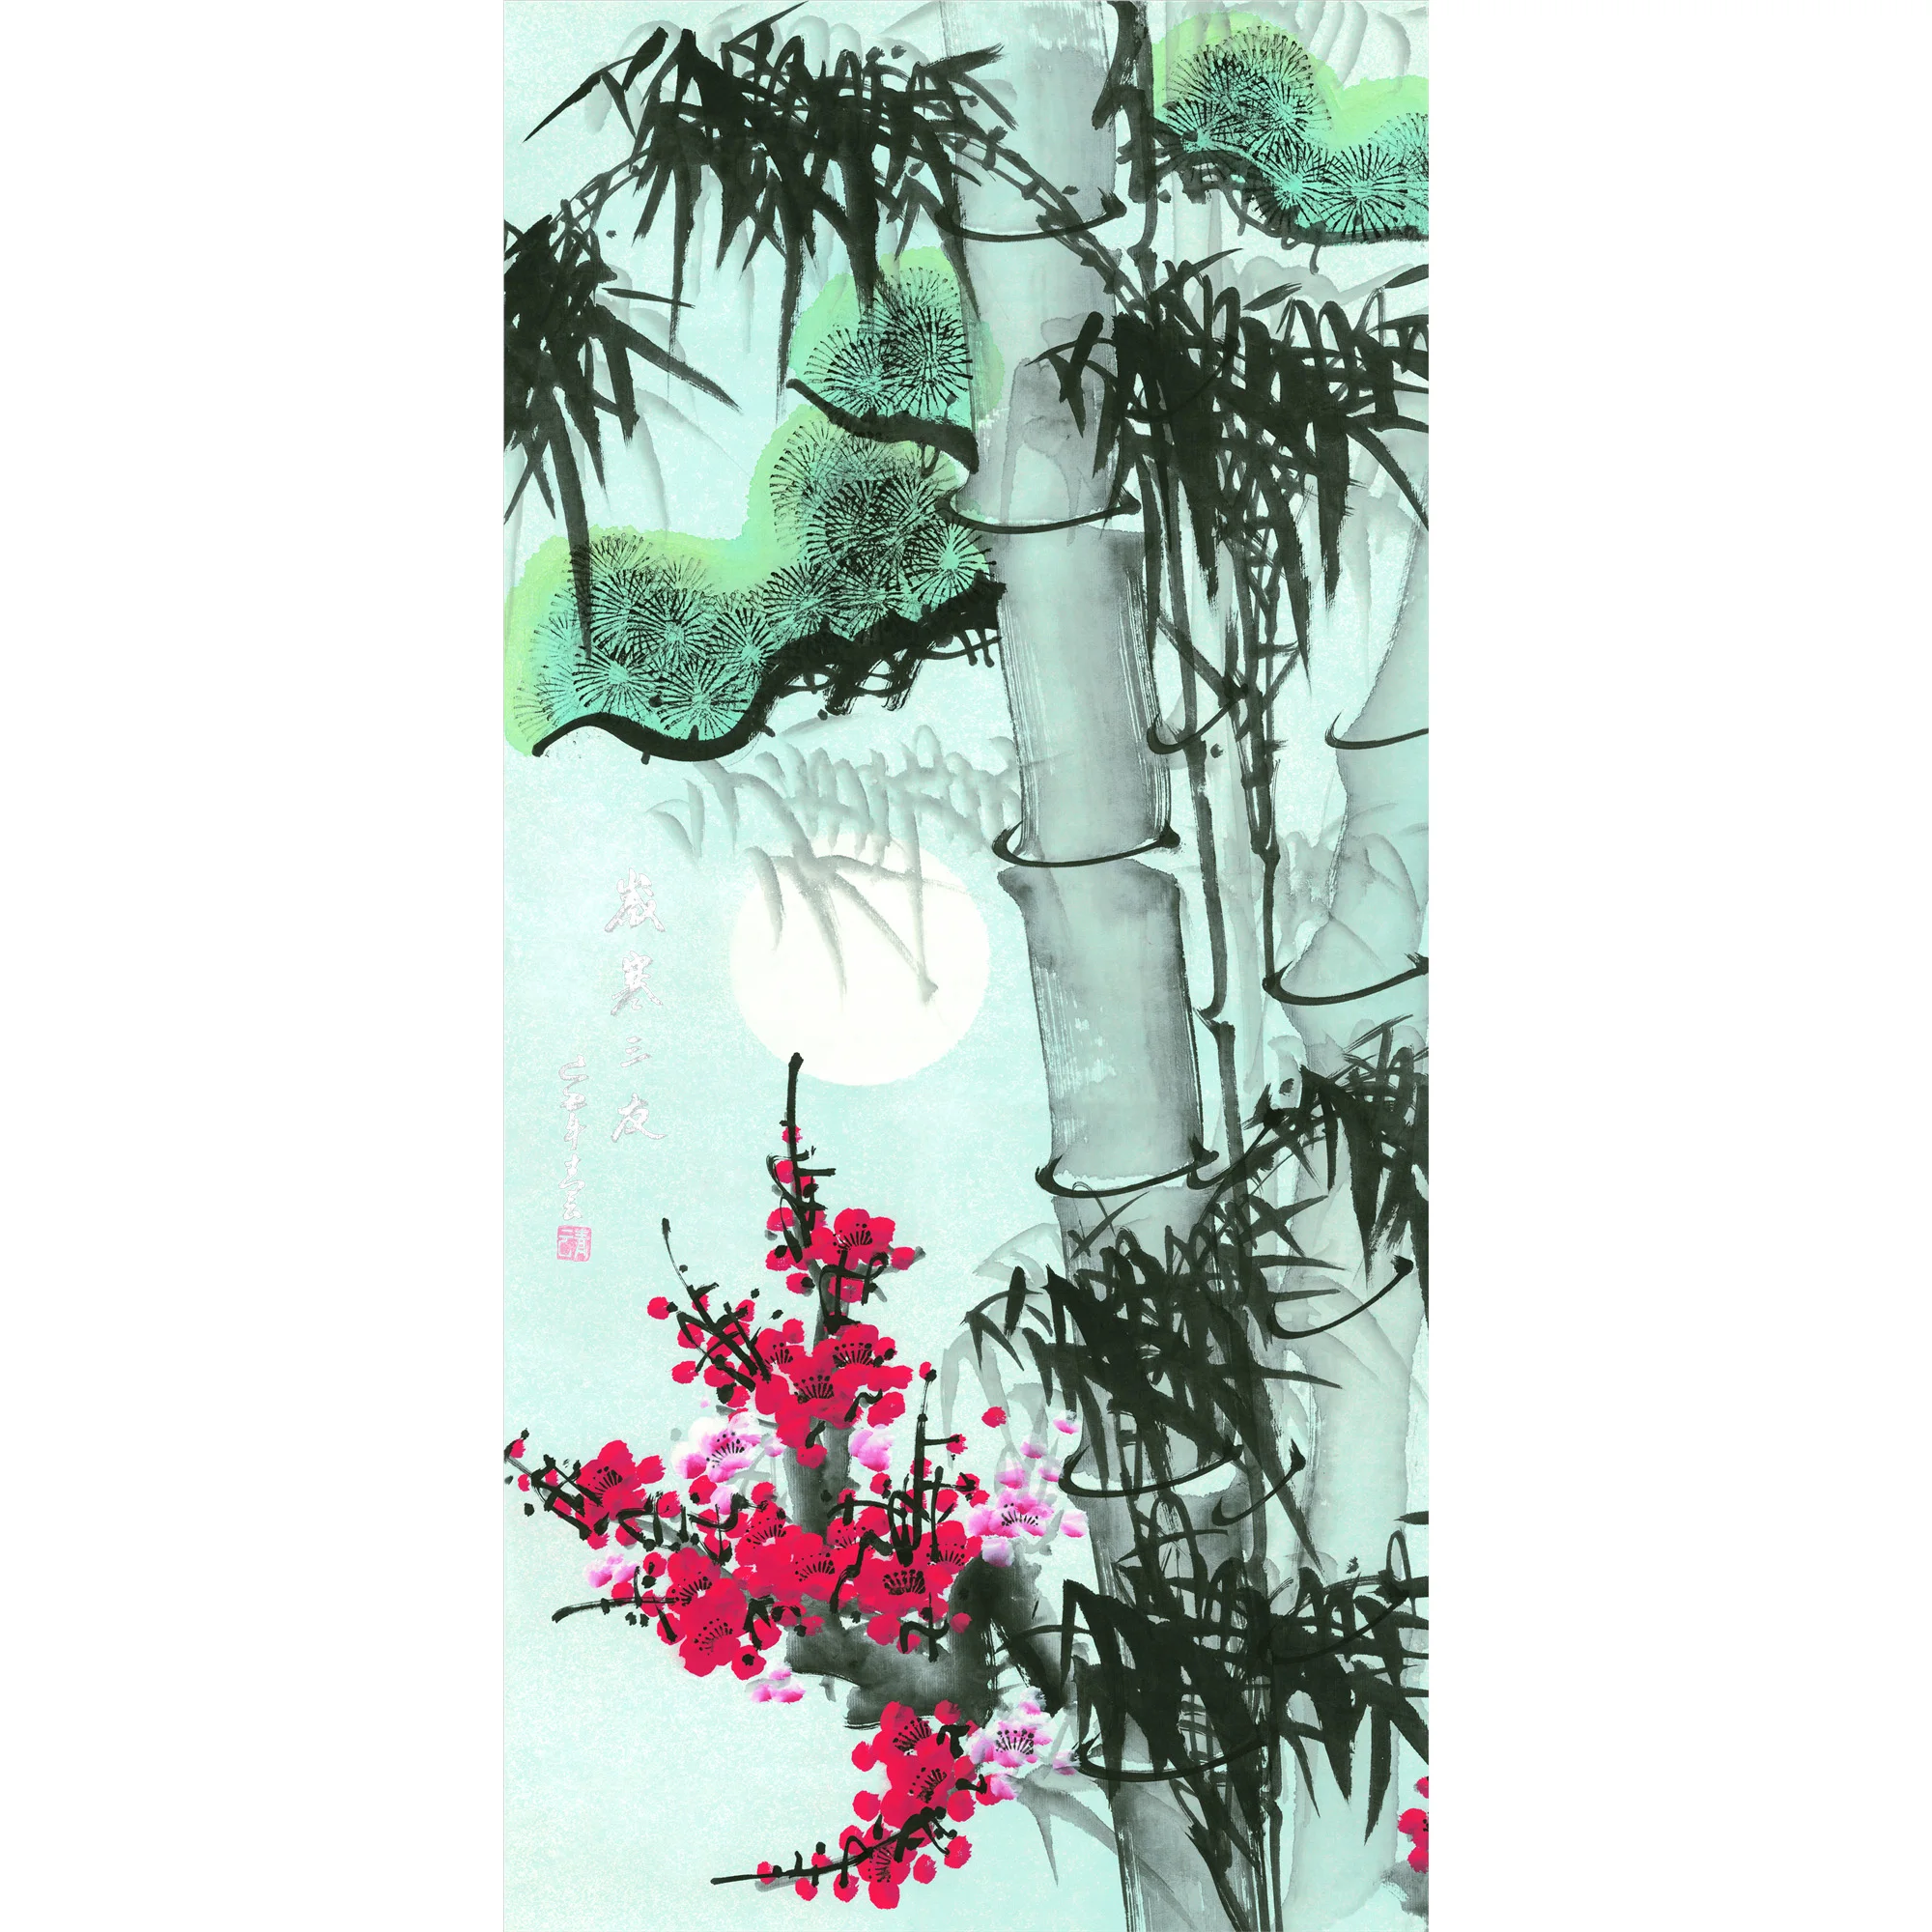 

Wall Silk Scroll Hanging Artwork Painting,Chinese scroll painting landscape art painting home decoration picture -Three Friends